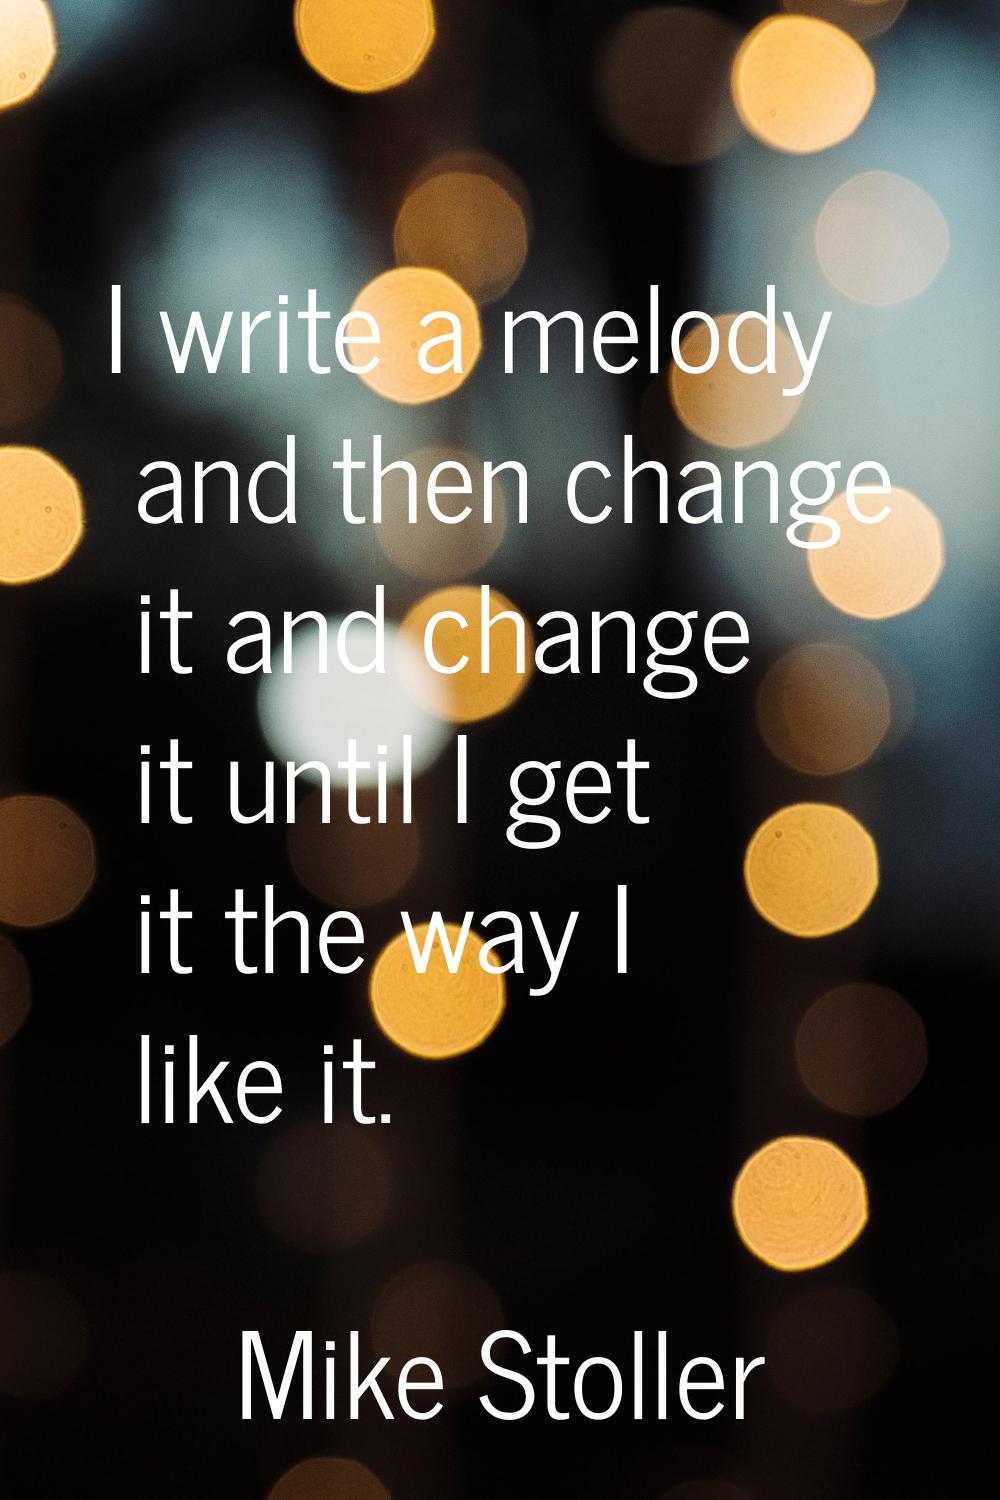 I write a melody and then change it and change it until I get it the way I like it.